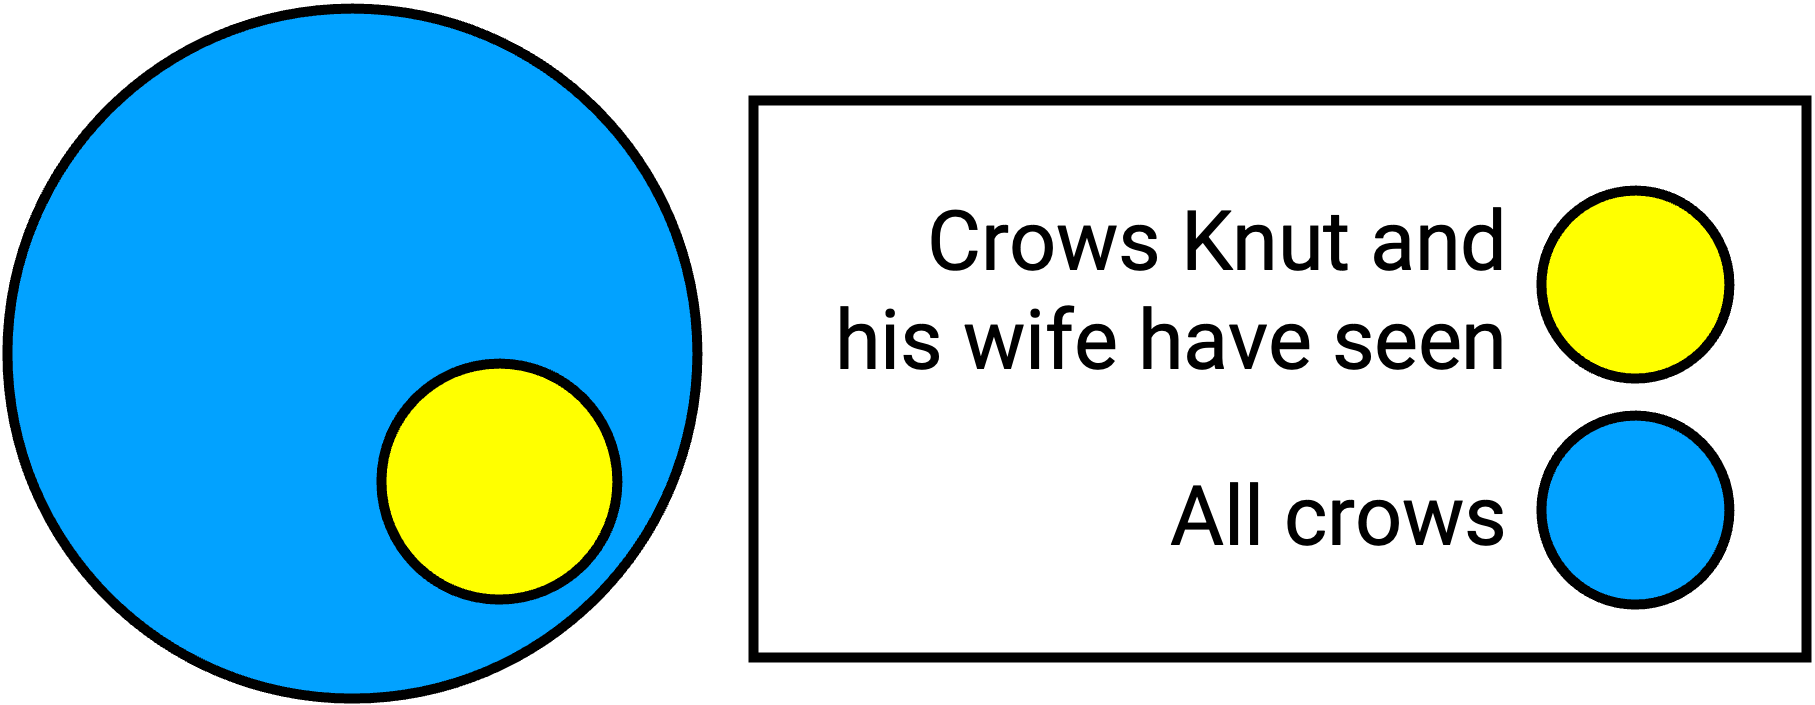 An example of inductive reasoning would be generalizing from the subset of crows you have seen to all crows.